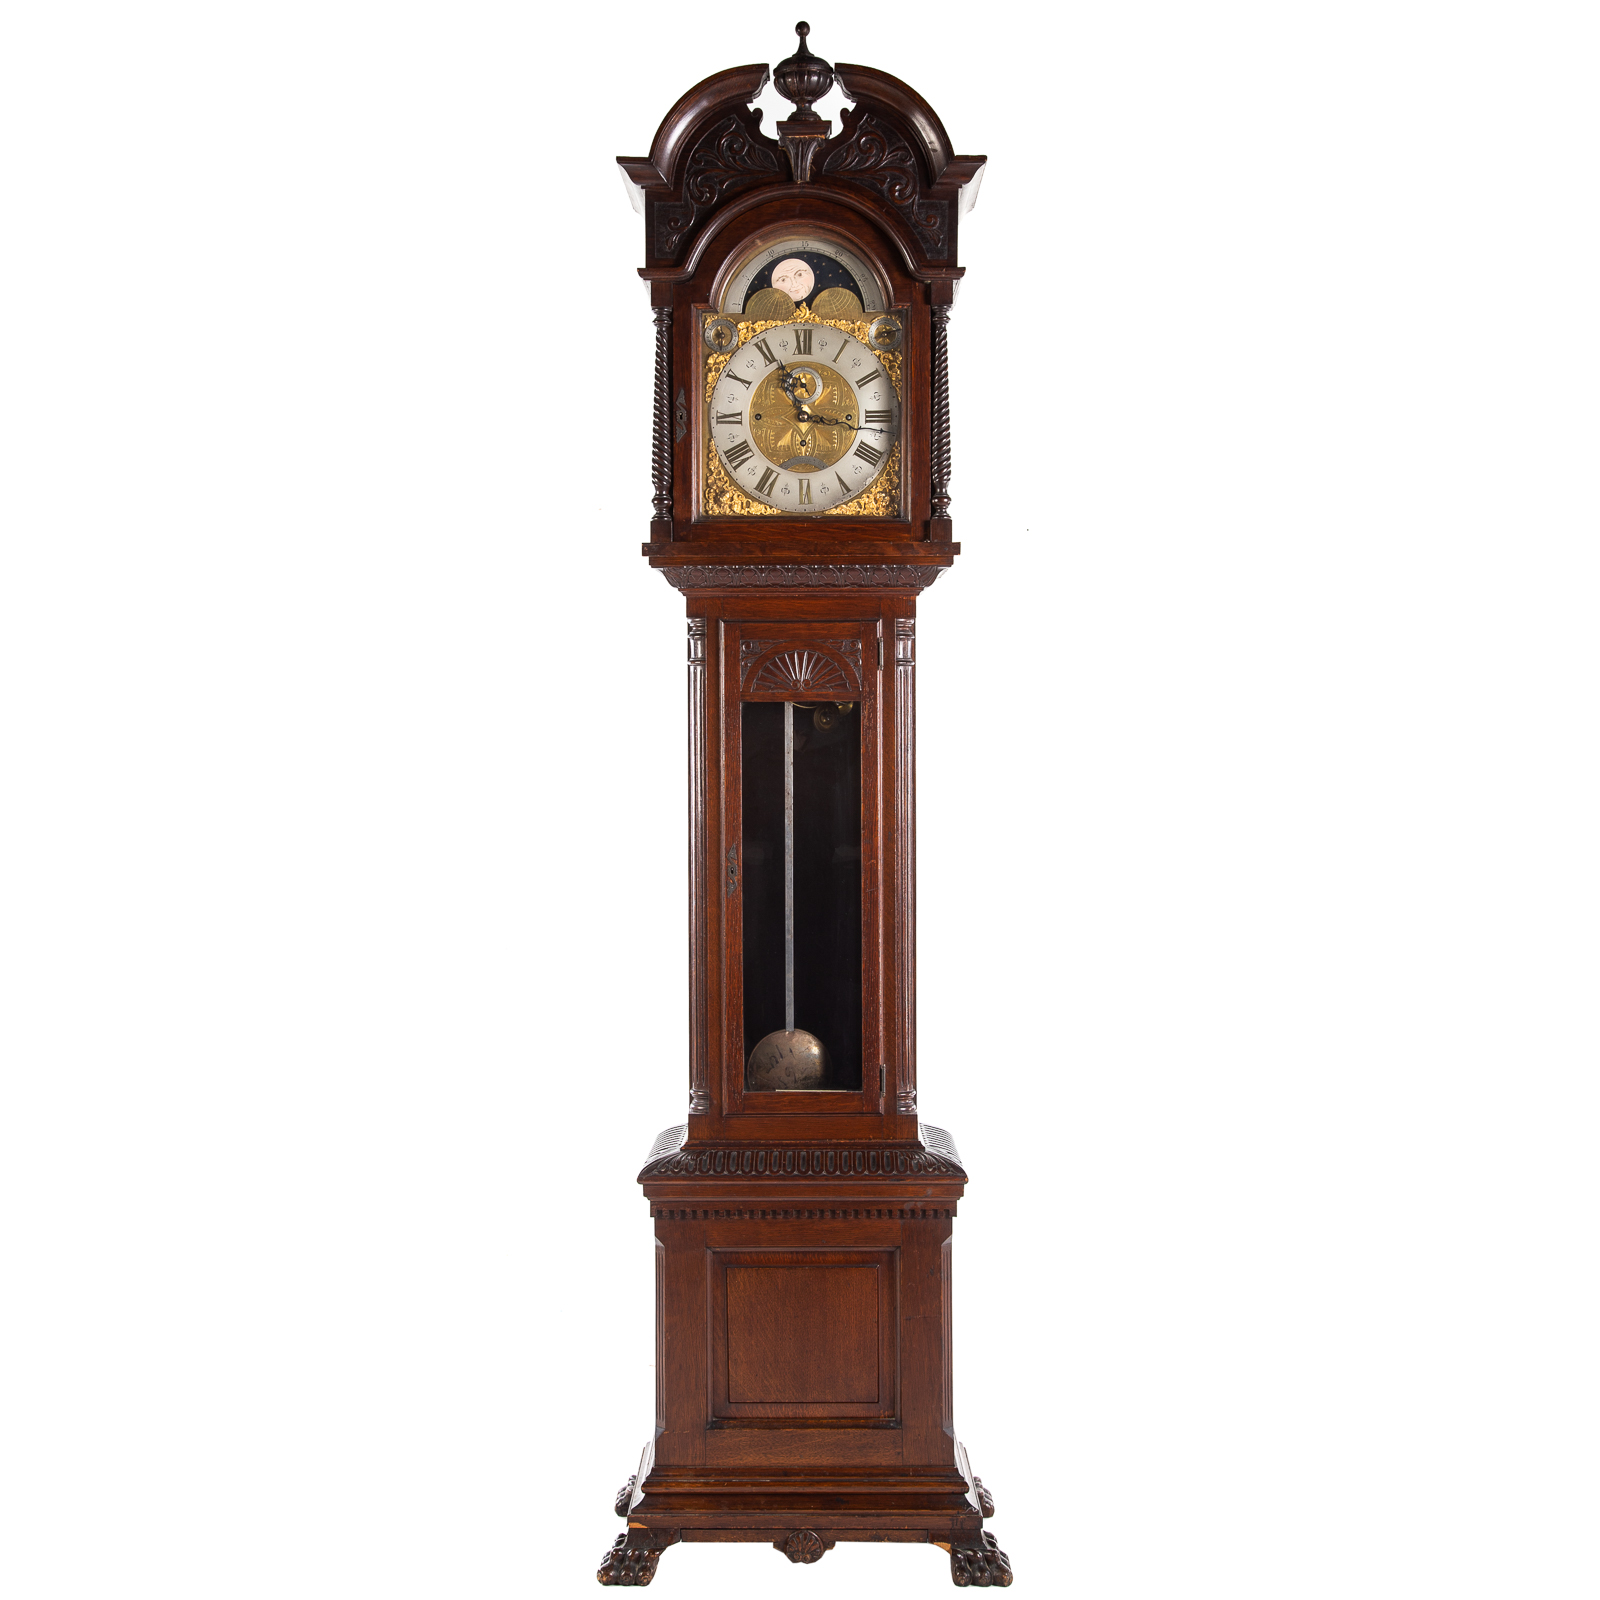 CHIPPENDALE STYLE OAK TALL CASE 29db0d